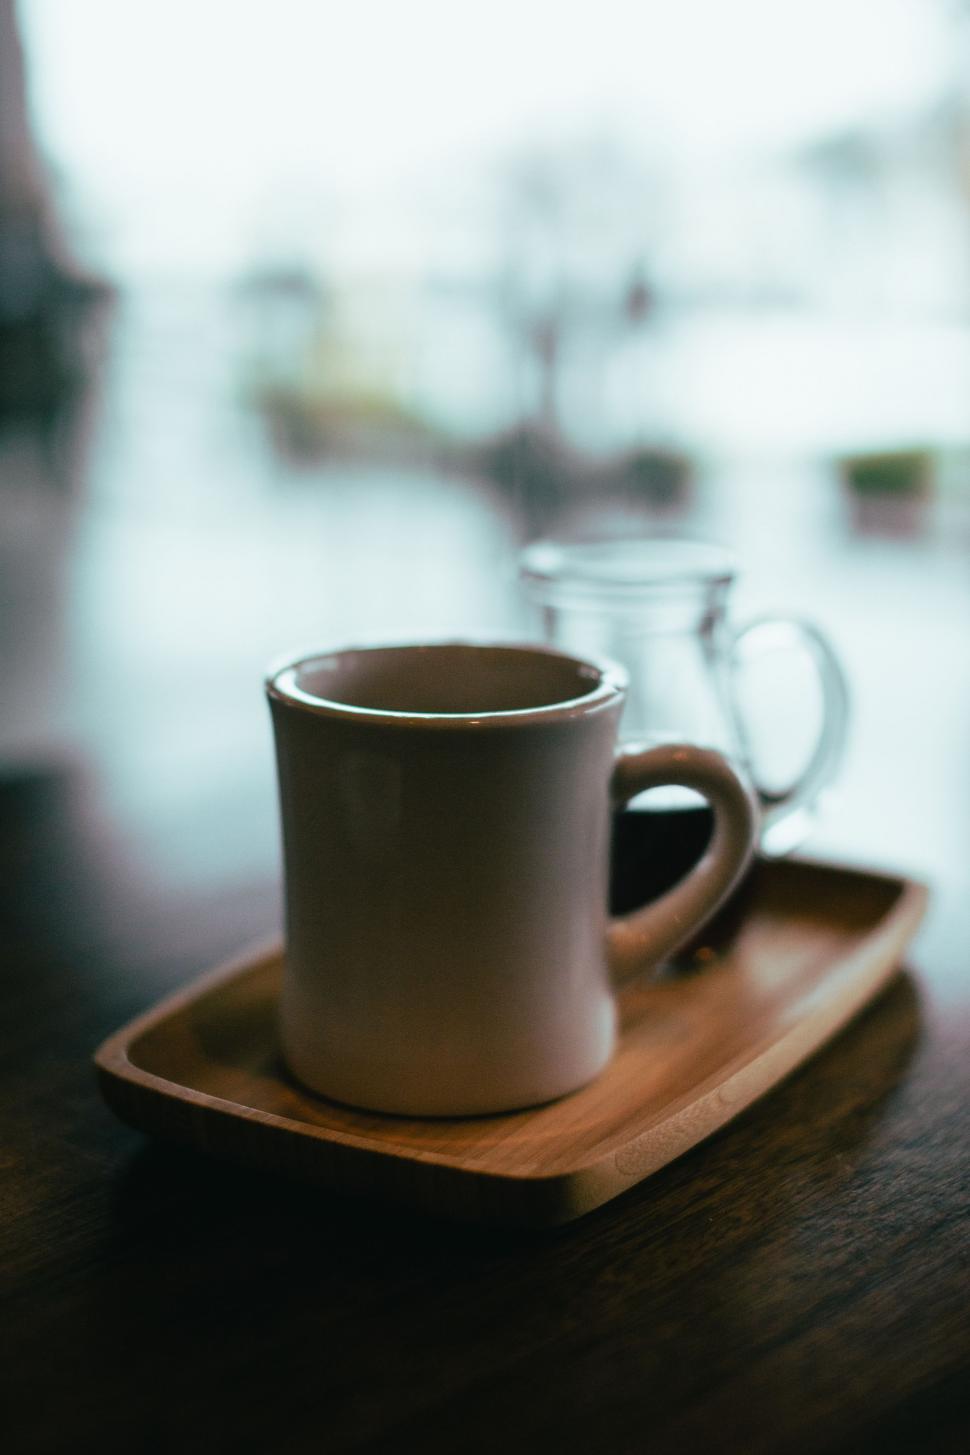 Free Image of Coffee Cup on Wooden Tray 